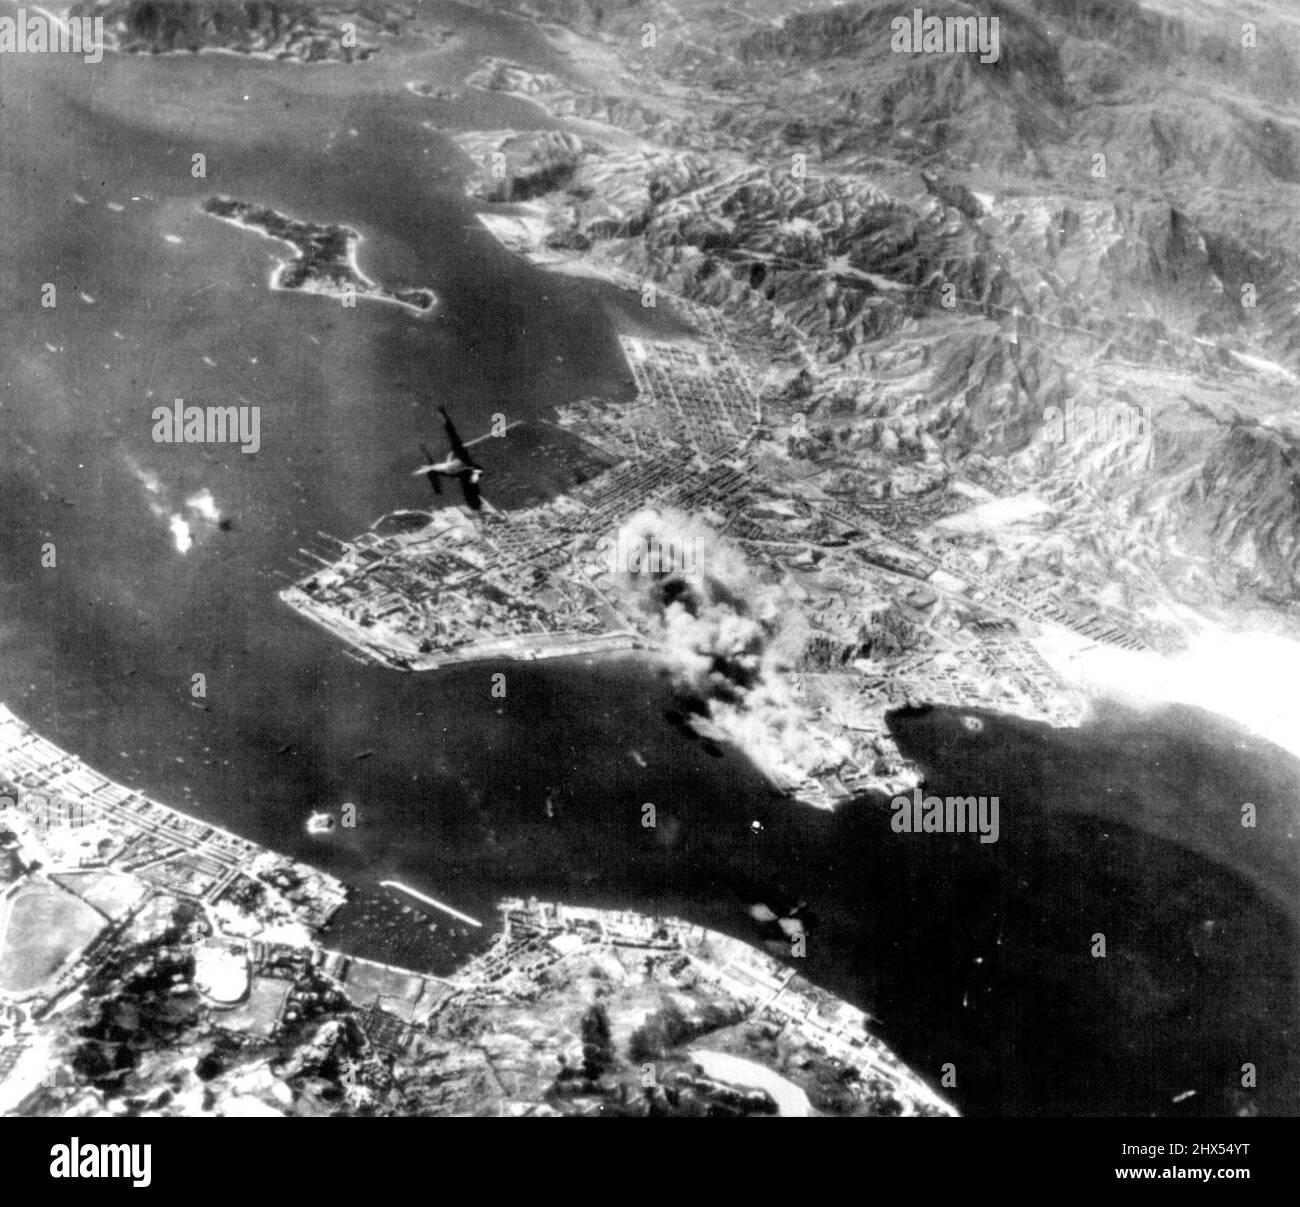 Yanks Hit Hong Kong Harbor In Surprise Attack -- Smoke ***** up from Kowloon docks and Railroad yards under the surprise ***** attack on Hong Kong Harbor October 16 by the U.S. army 14th ***** A Japanese fighter plane (left center) turns in to ***** Between the Royal Navy Yard (left) and Stonecutter's ***** Enemy vessels spout flames, and just outside ***** another ship has been hit. This attack sank ***** October 26, 1944. (Photo by AP Wirephoto). Stock Photo